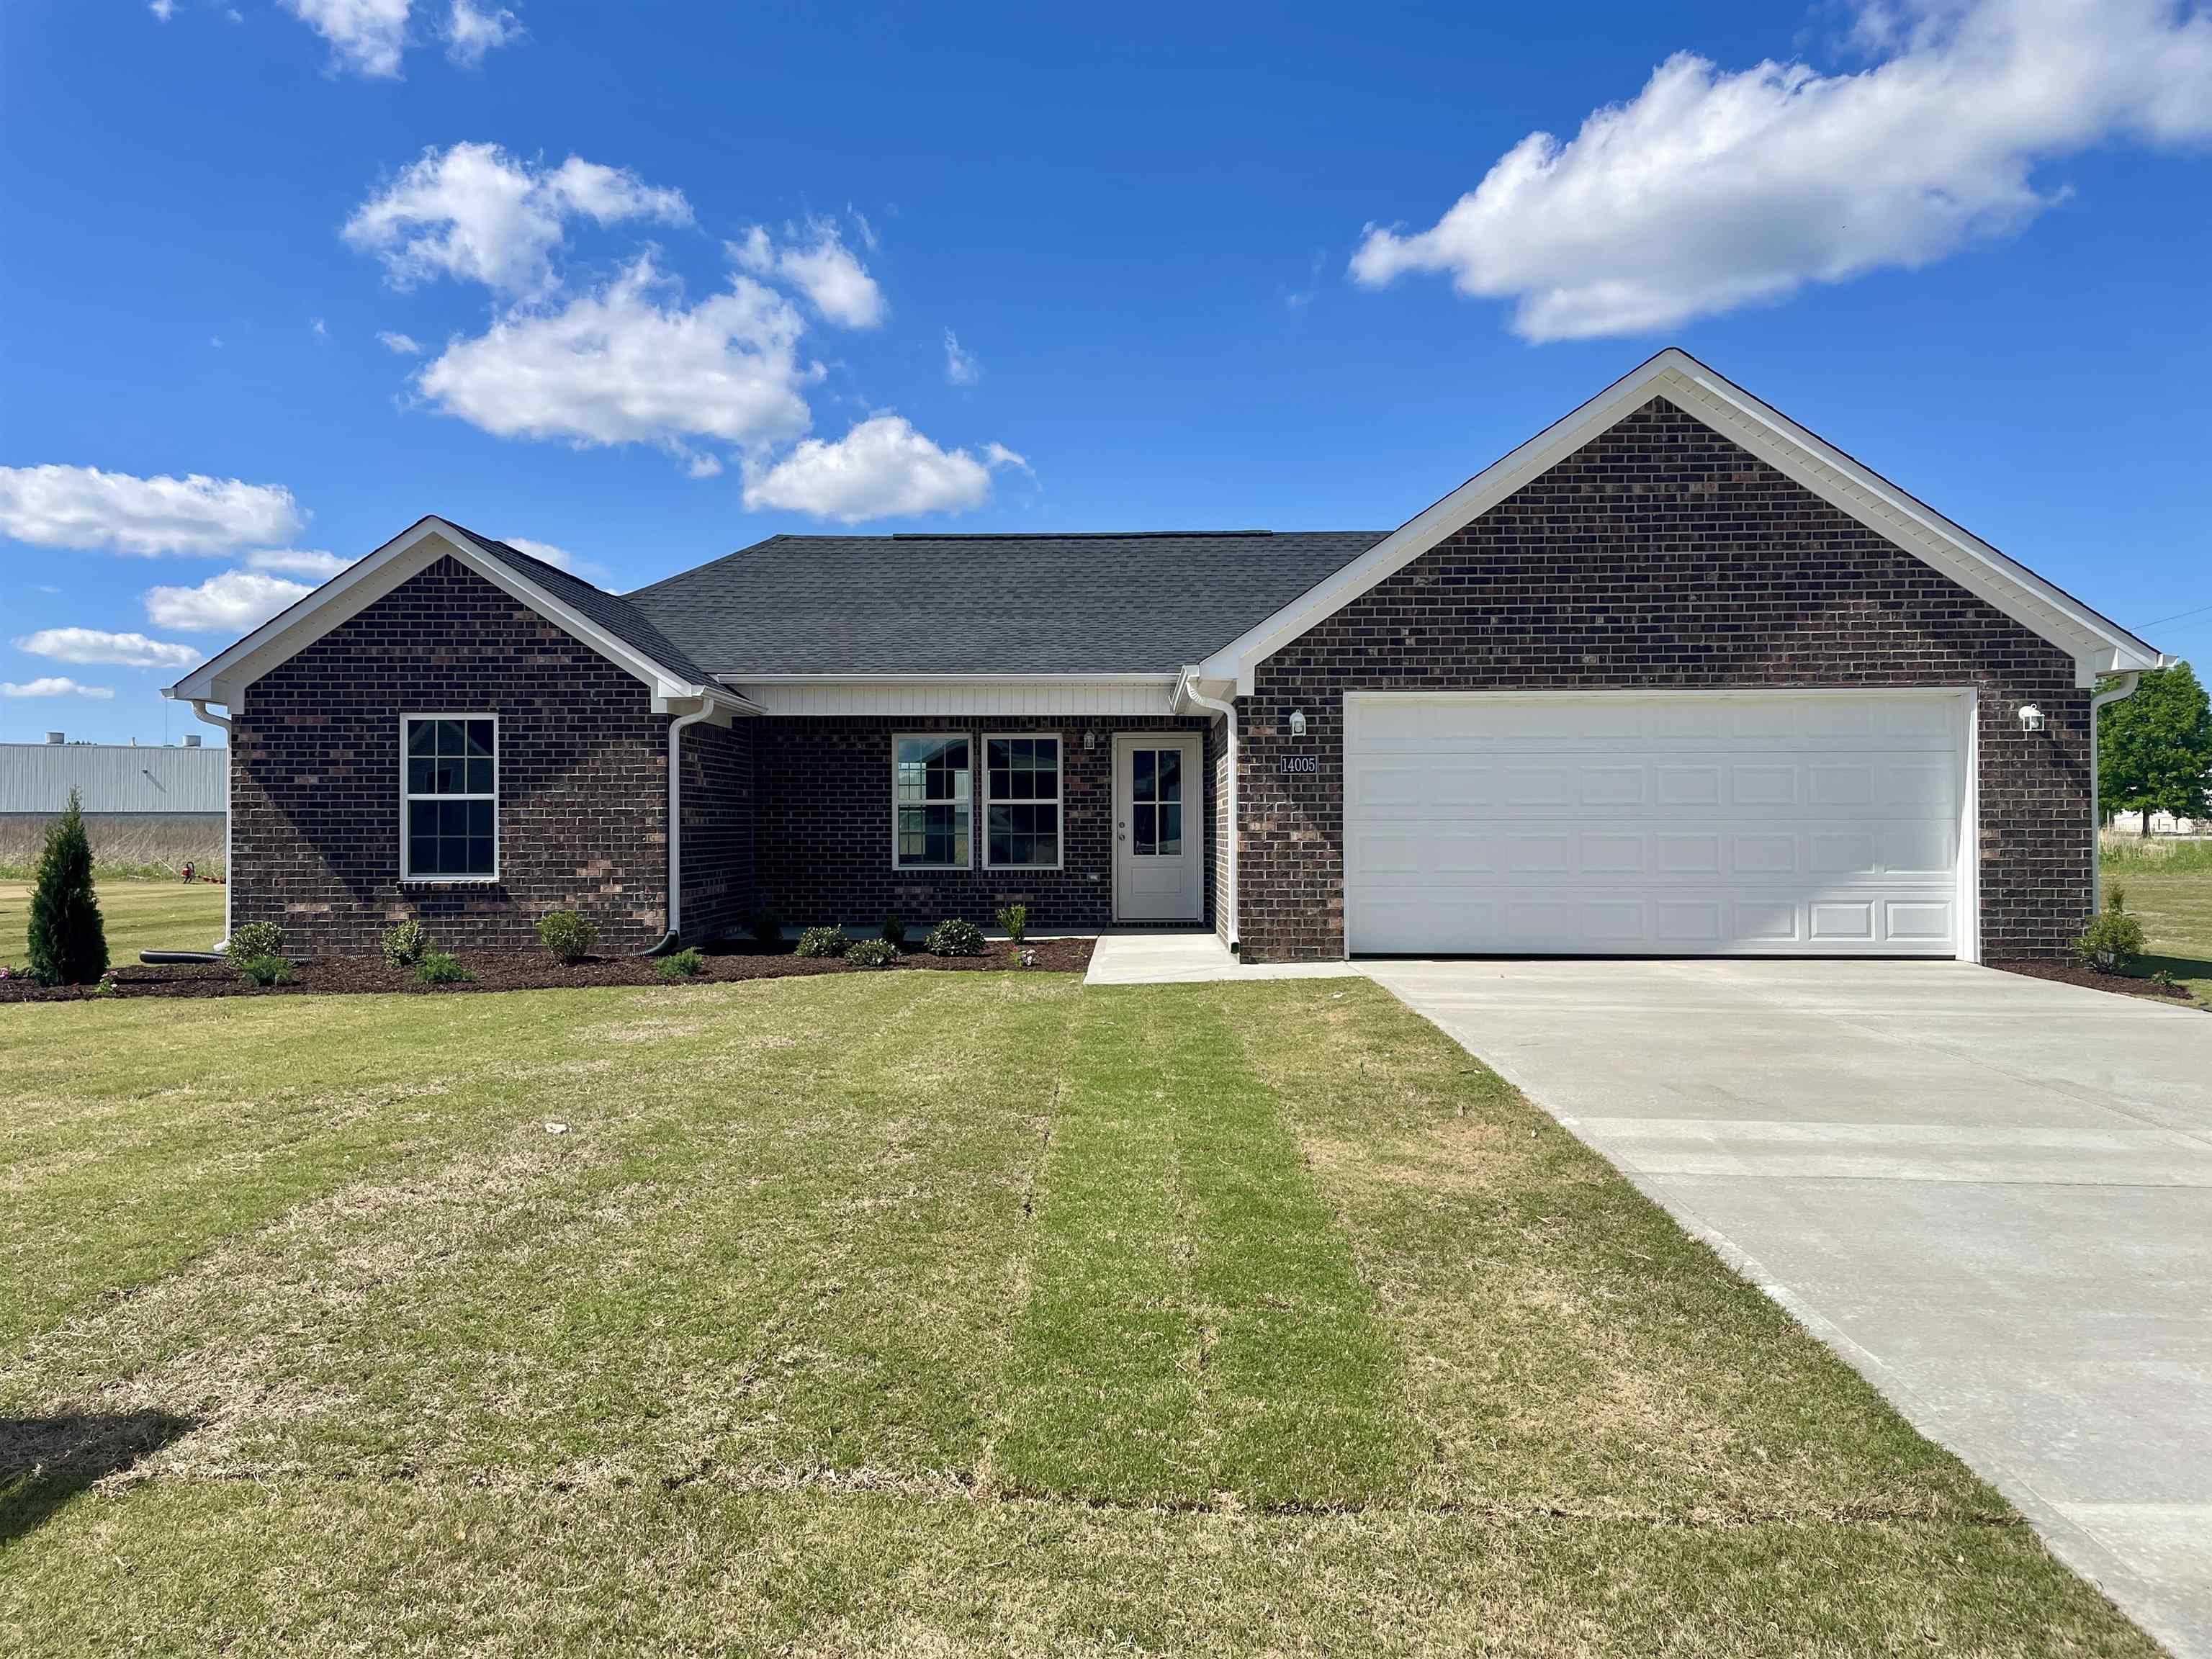 14005 Westhaven Cove, Milan, TN 38358